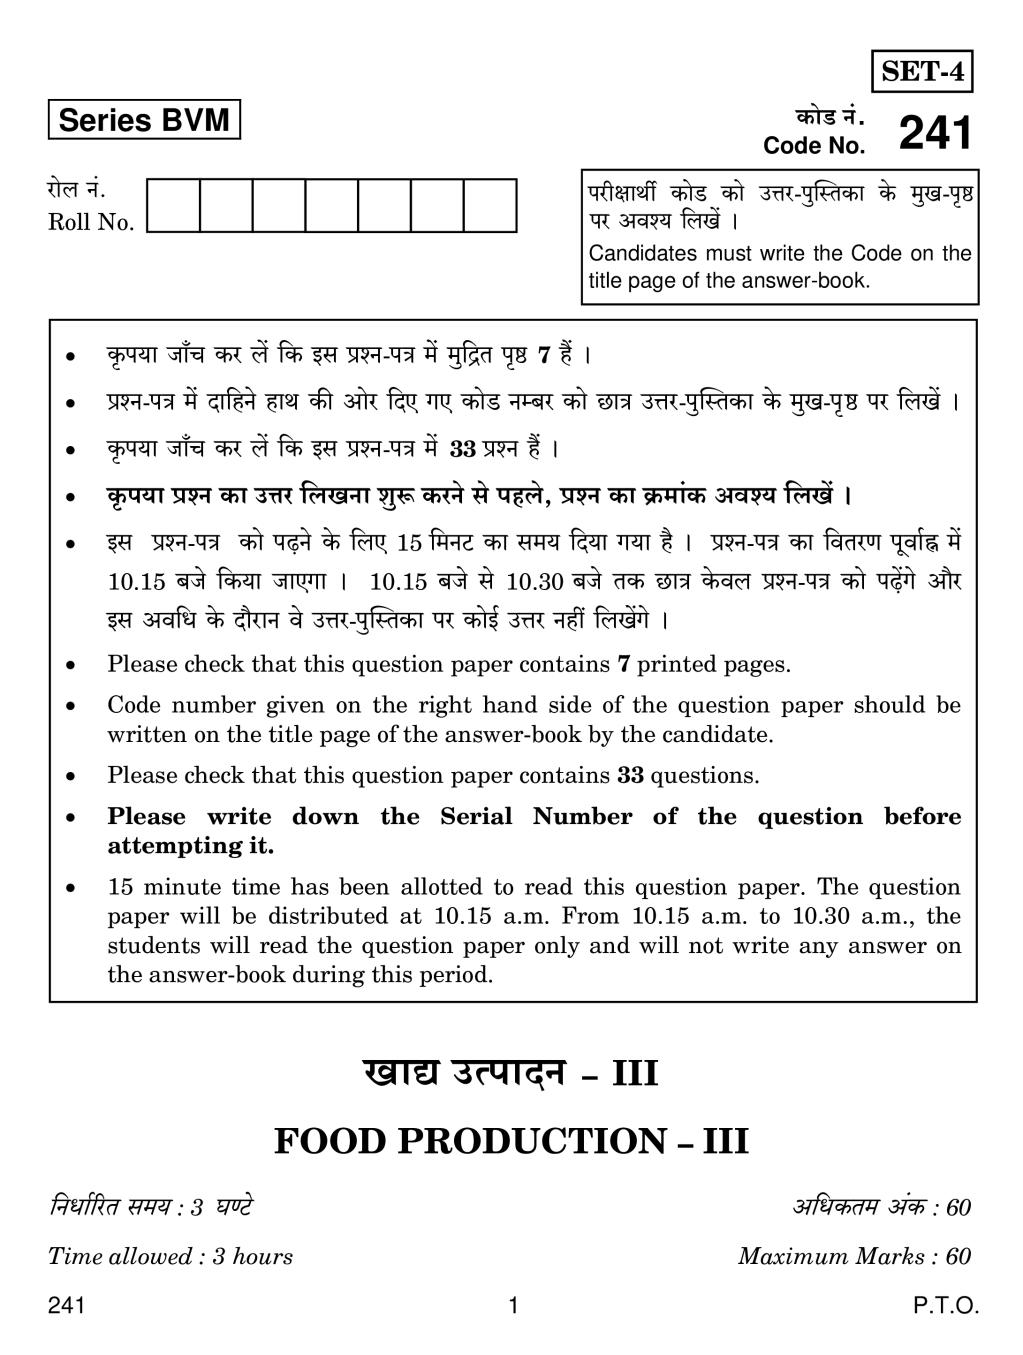 CBSE Class 12 Food Production III Question Paper 2019 - Page 1